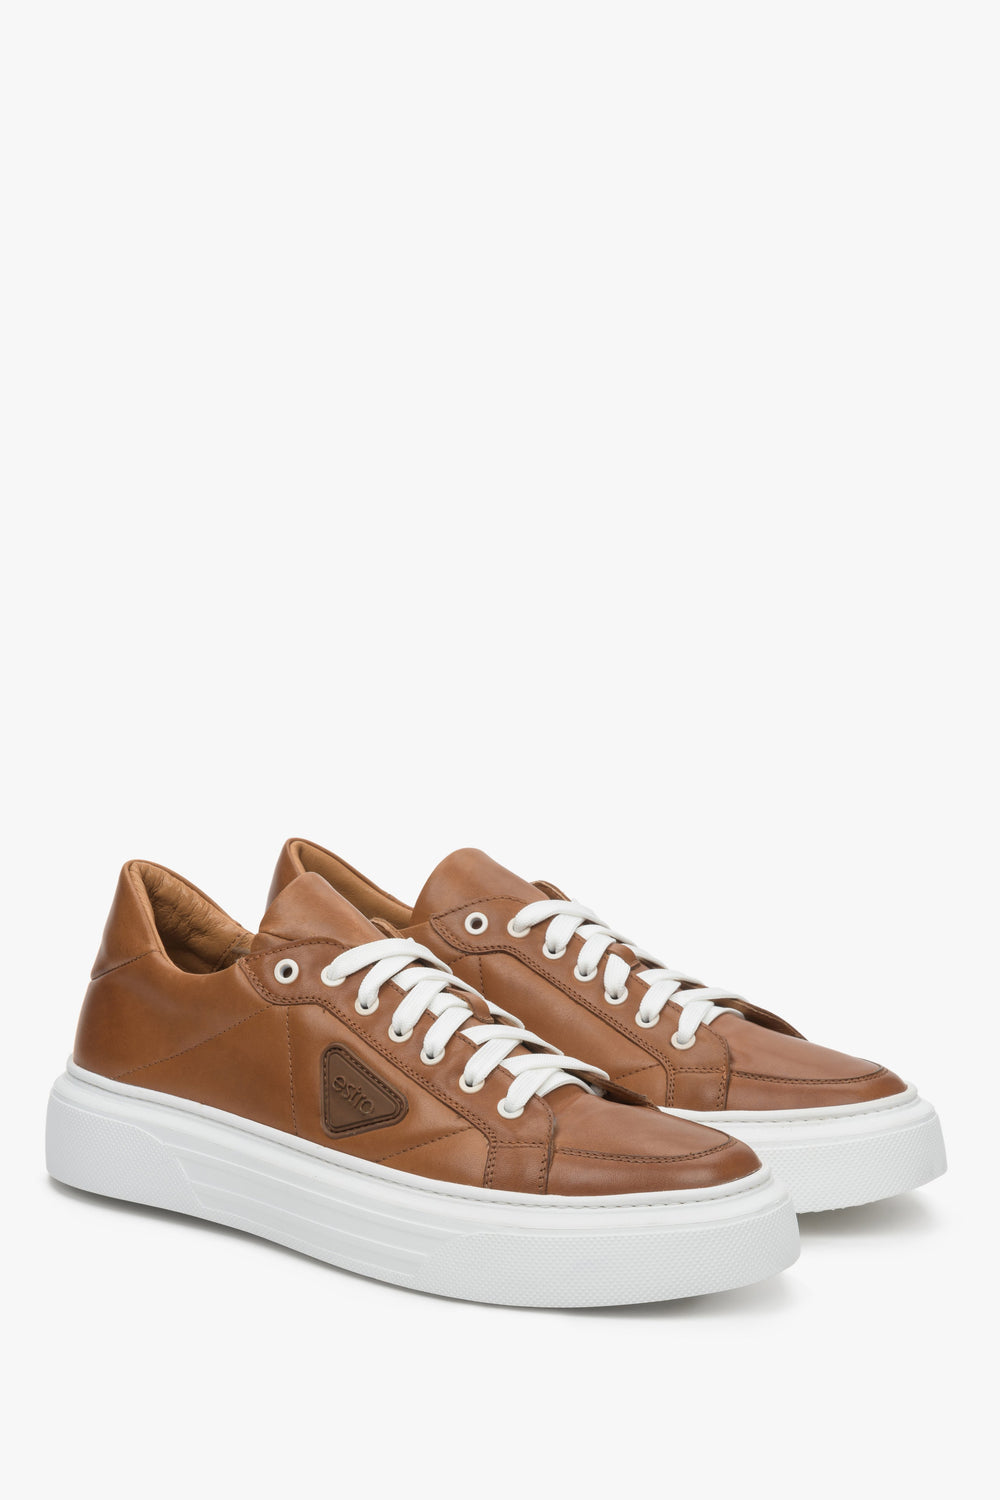 Men's Brown Sneakers made of Genuine Leather Estro ER00111377.